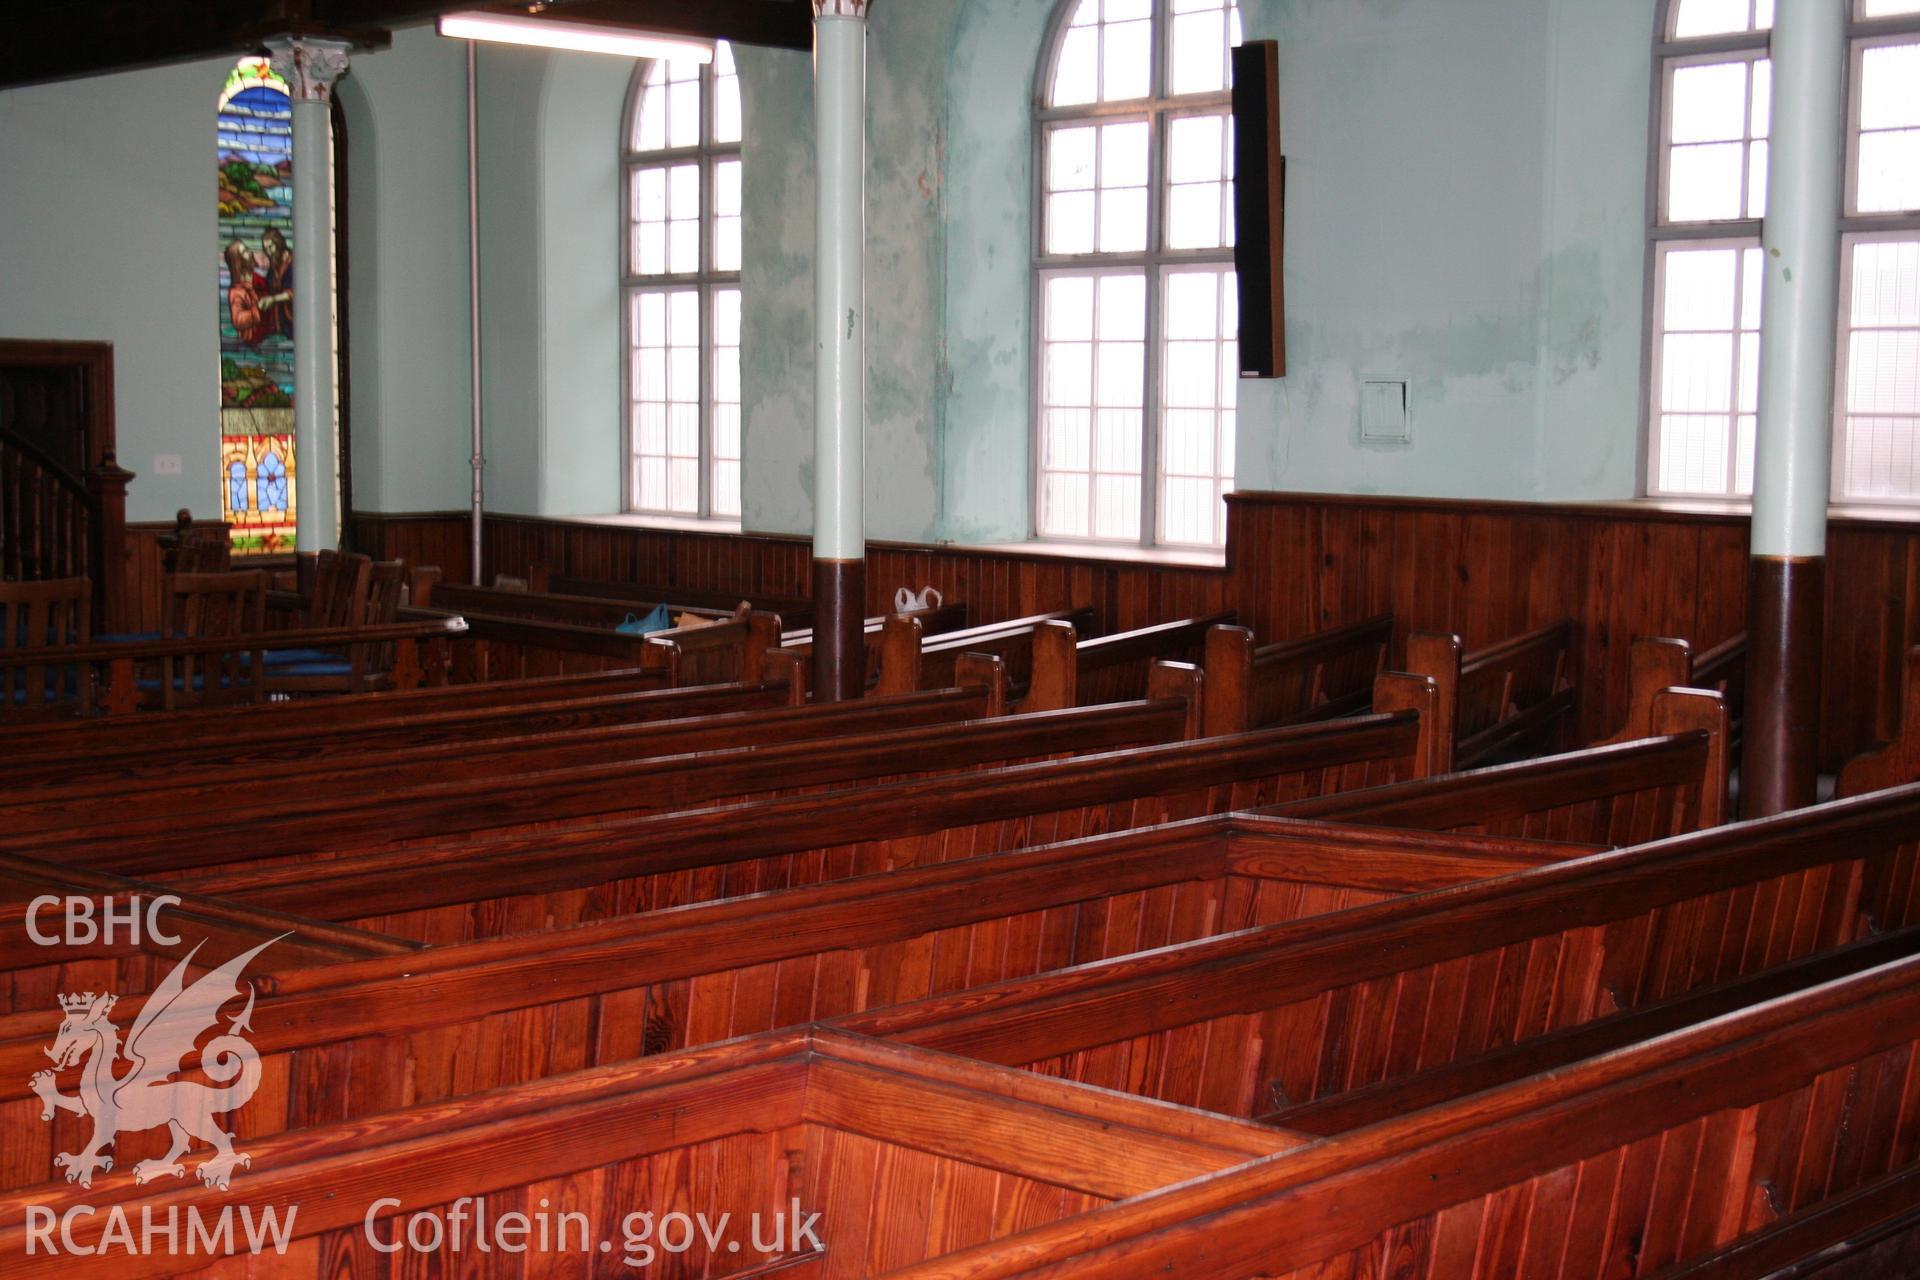 Hanbury Road baptist chapel, Bargoed, digital colour photograph showing interior - pews, received in the course of Emergency Recording case ref no RCS2/1/2247.